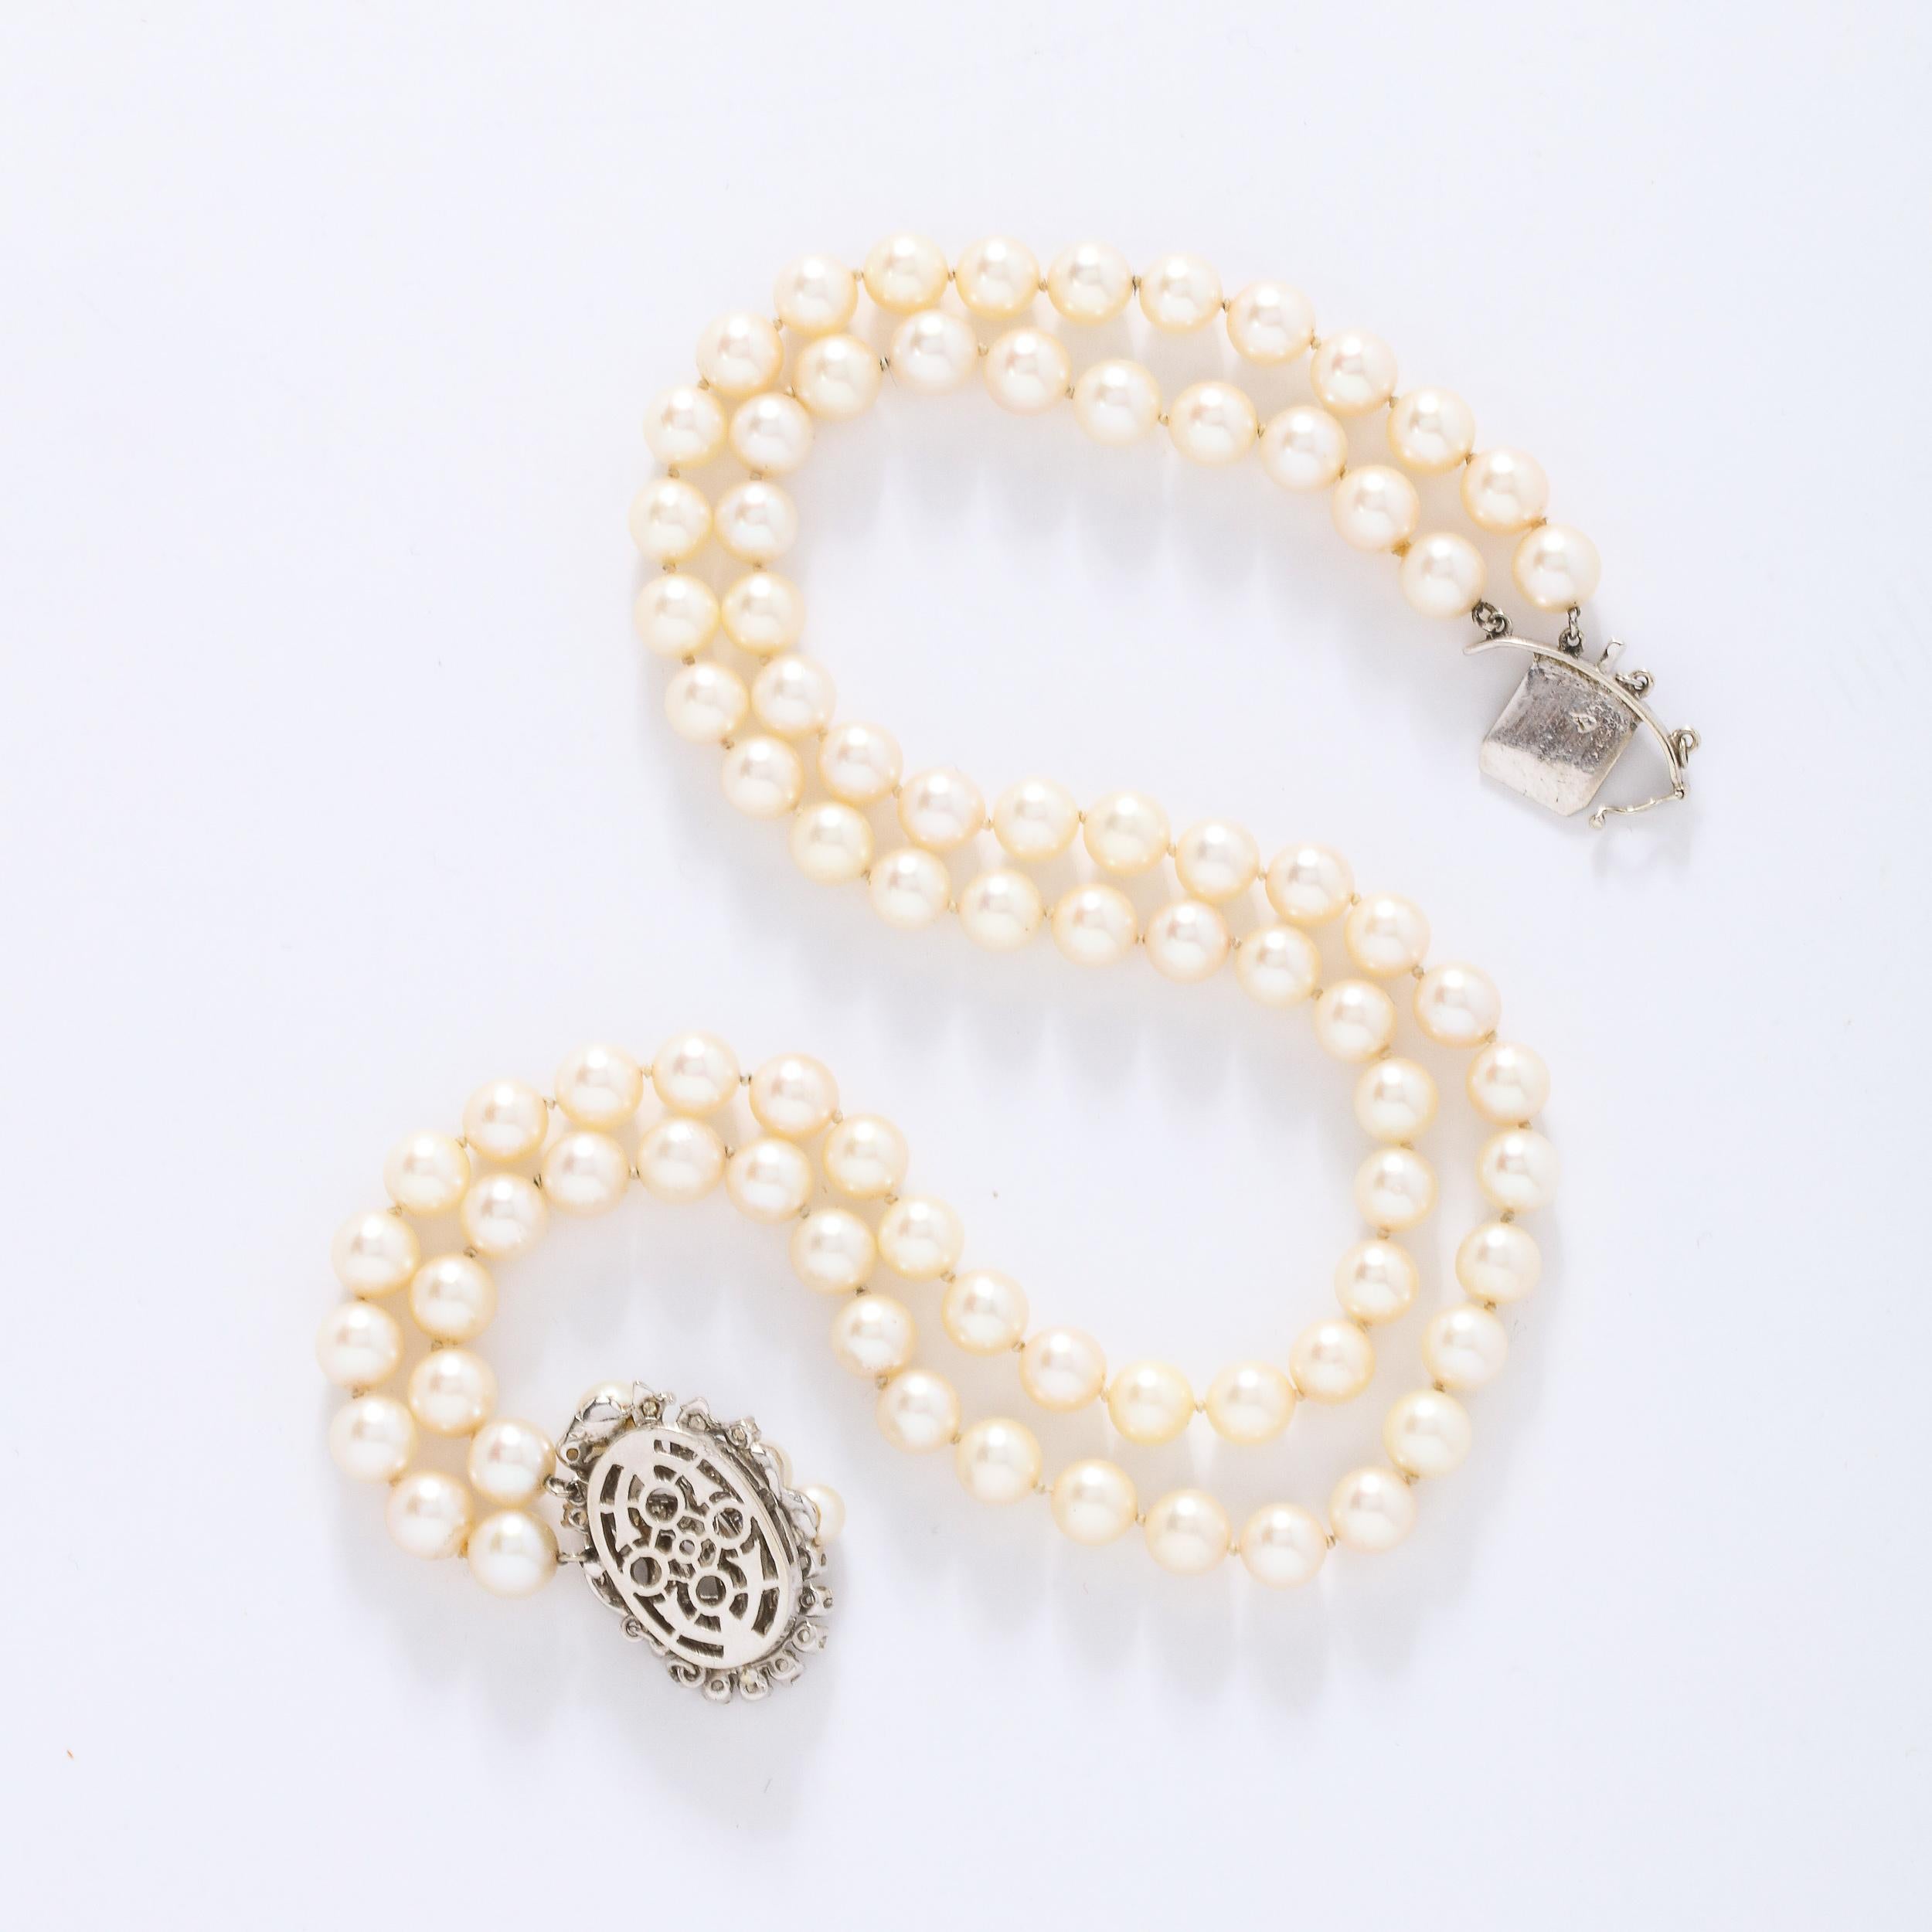 Art Deco Double Strand Pearl Necklace with 14kt Gold, Diamond and Pearl Clasp In Excellent Condition For Sale In New York, NY